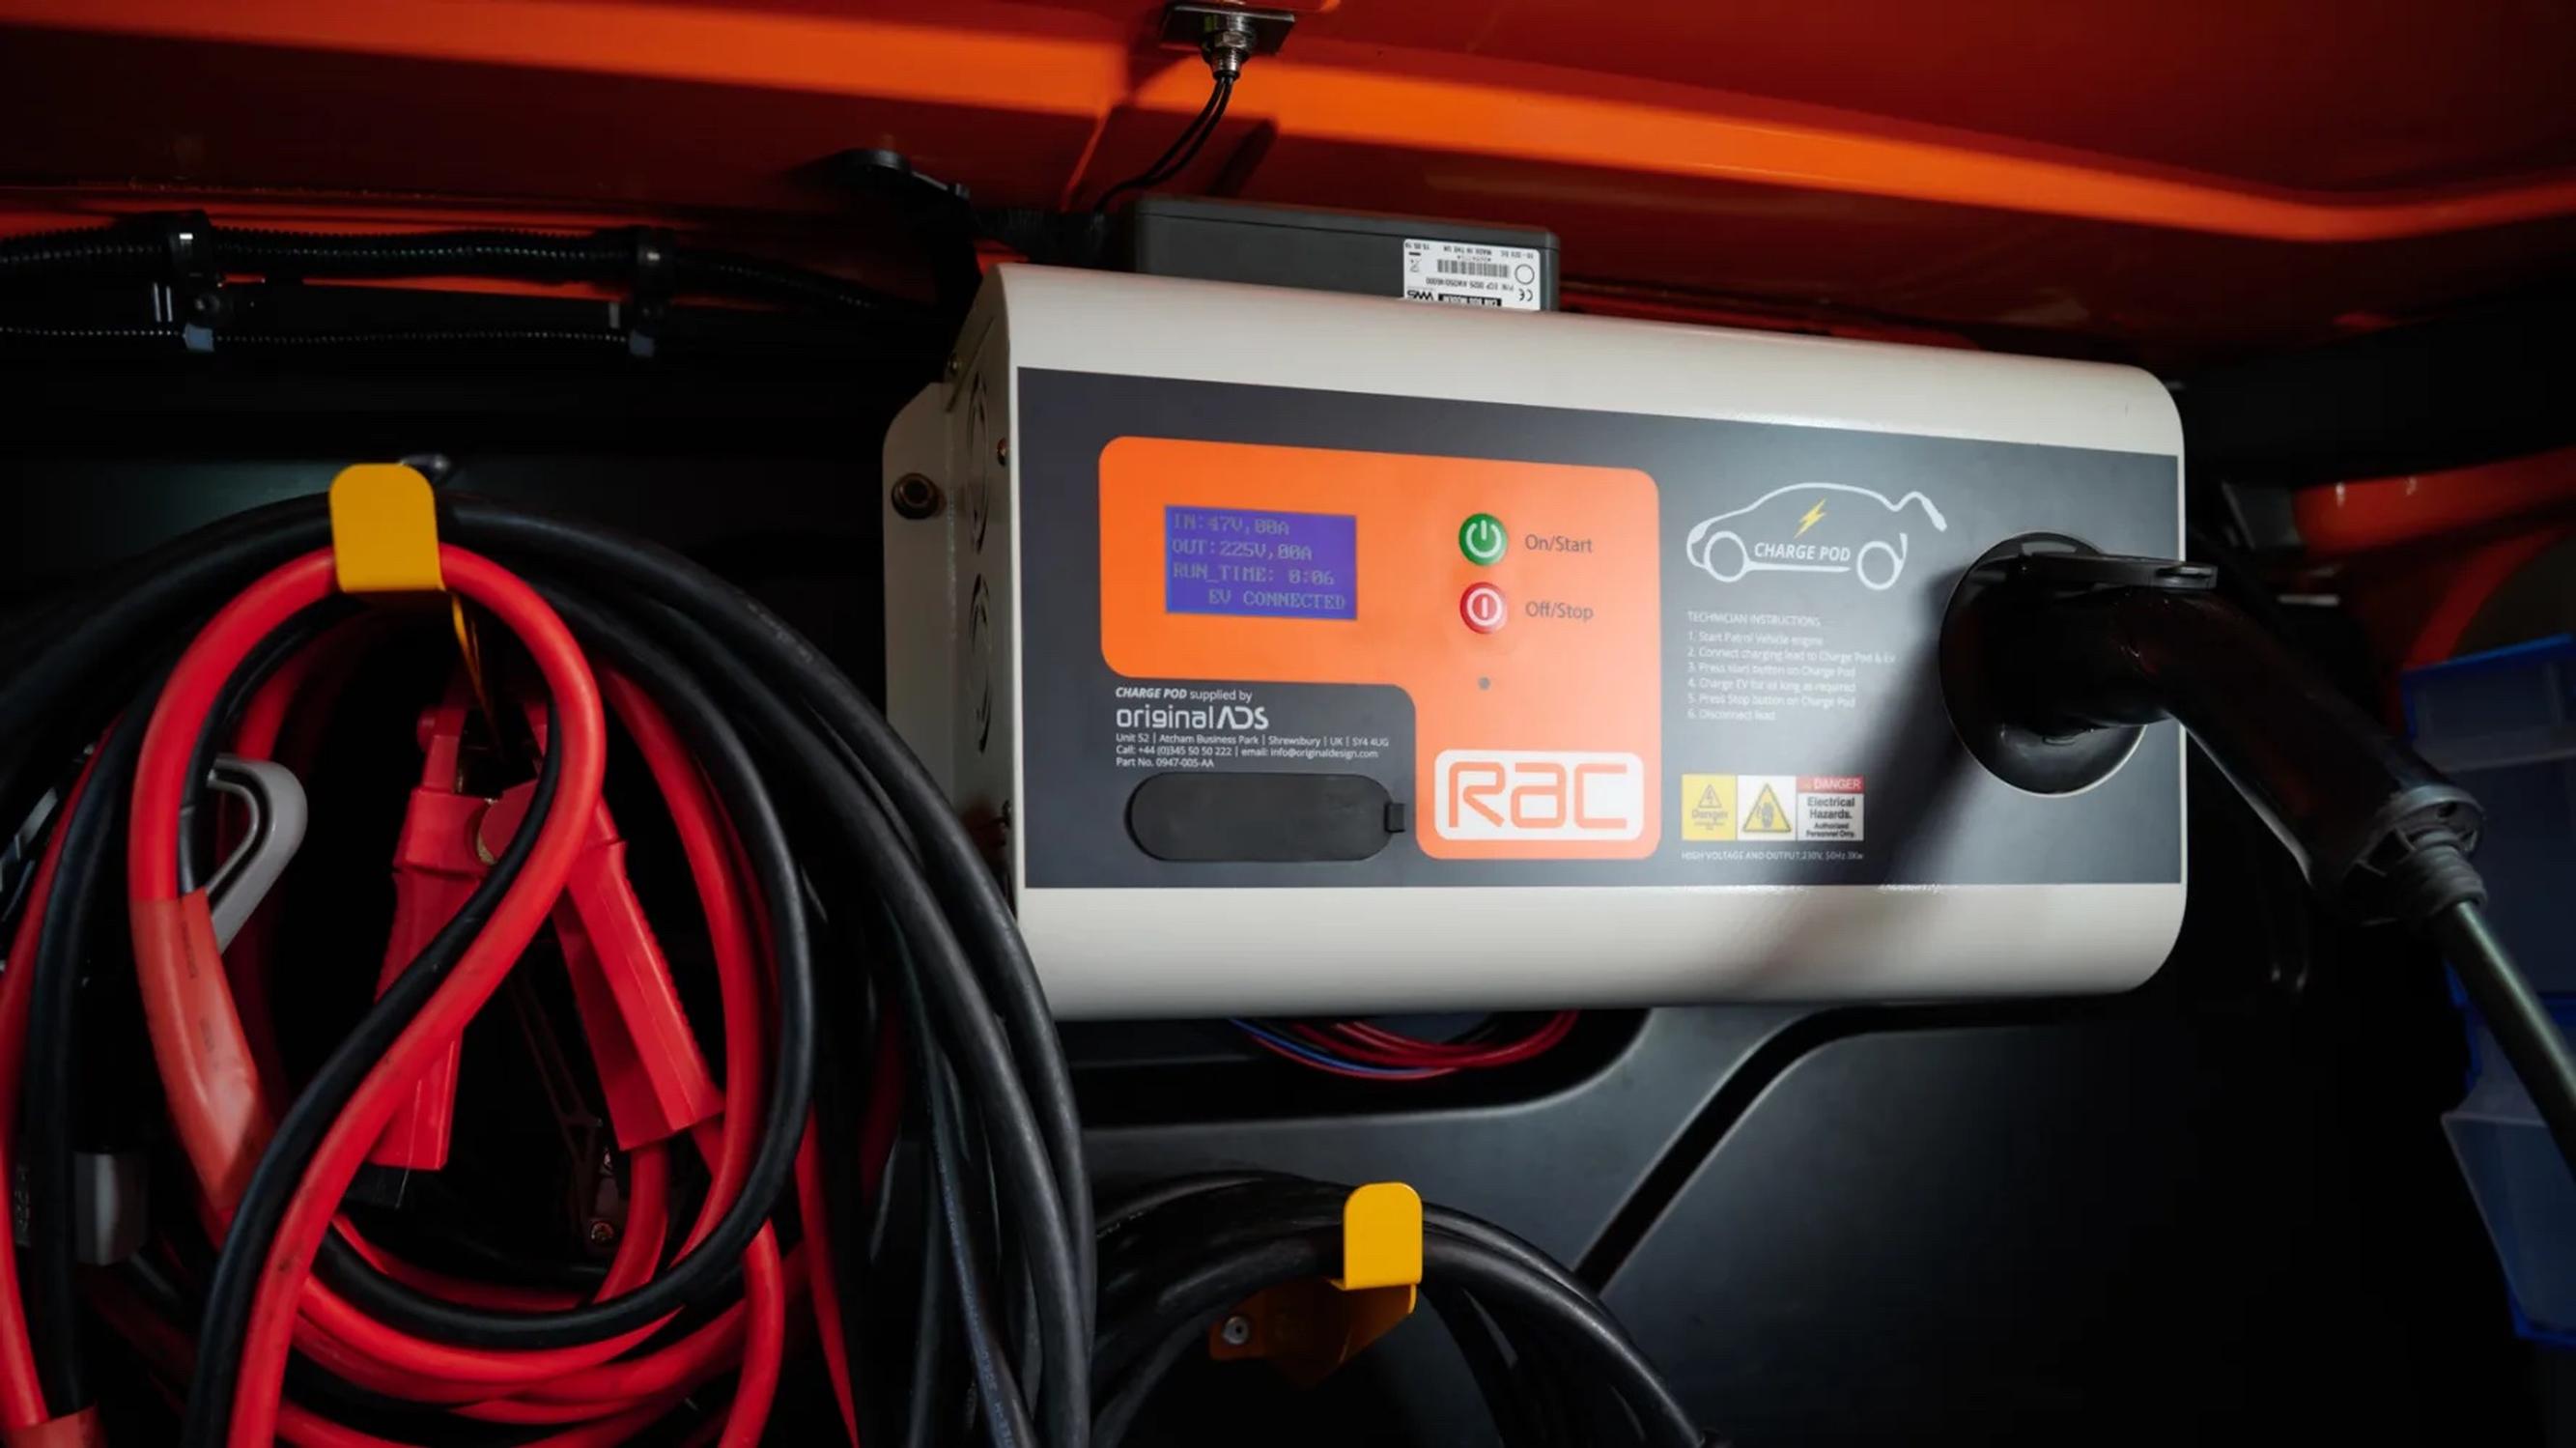 The RAC engine-powered emergency charger